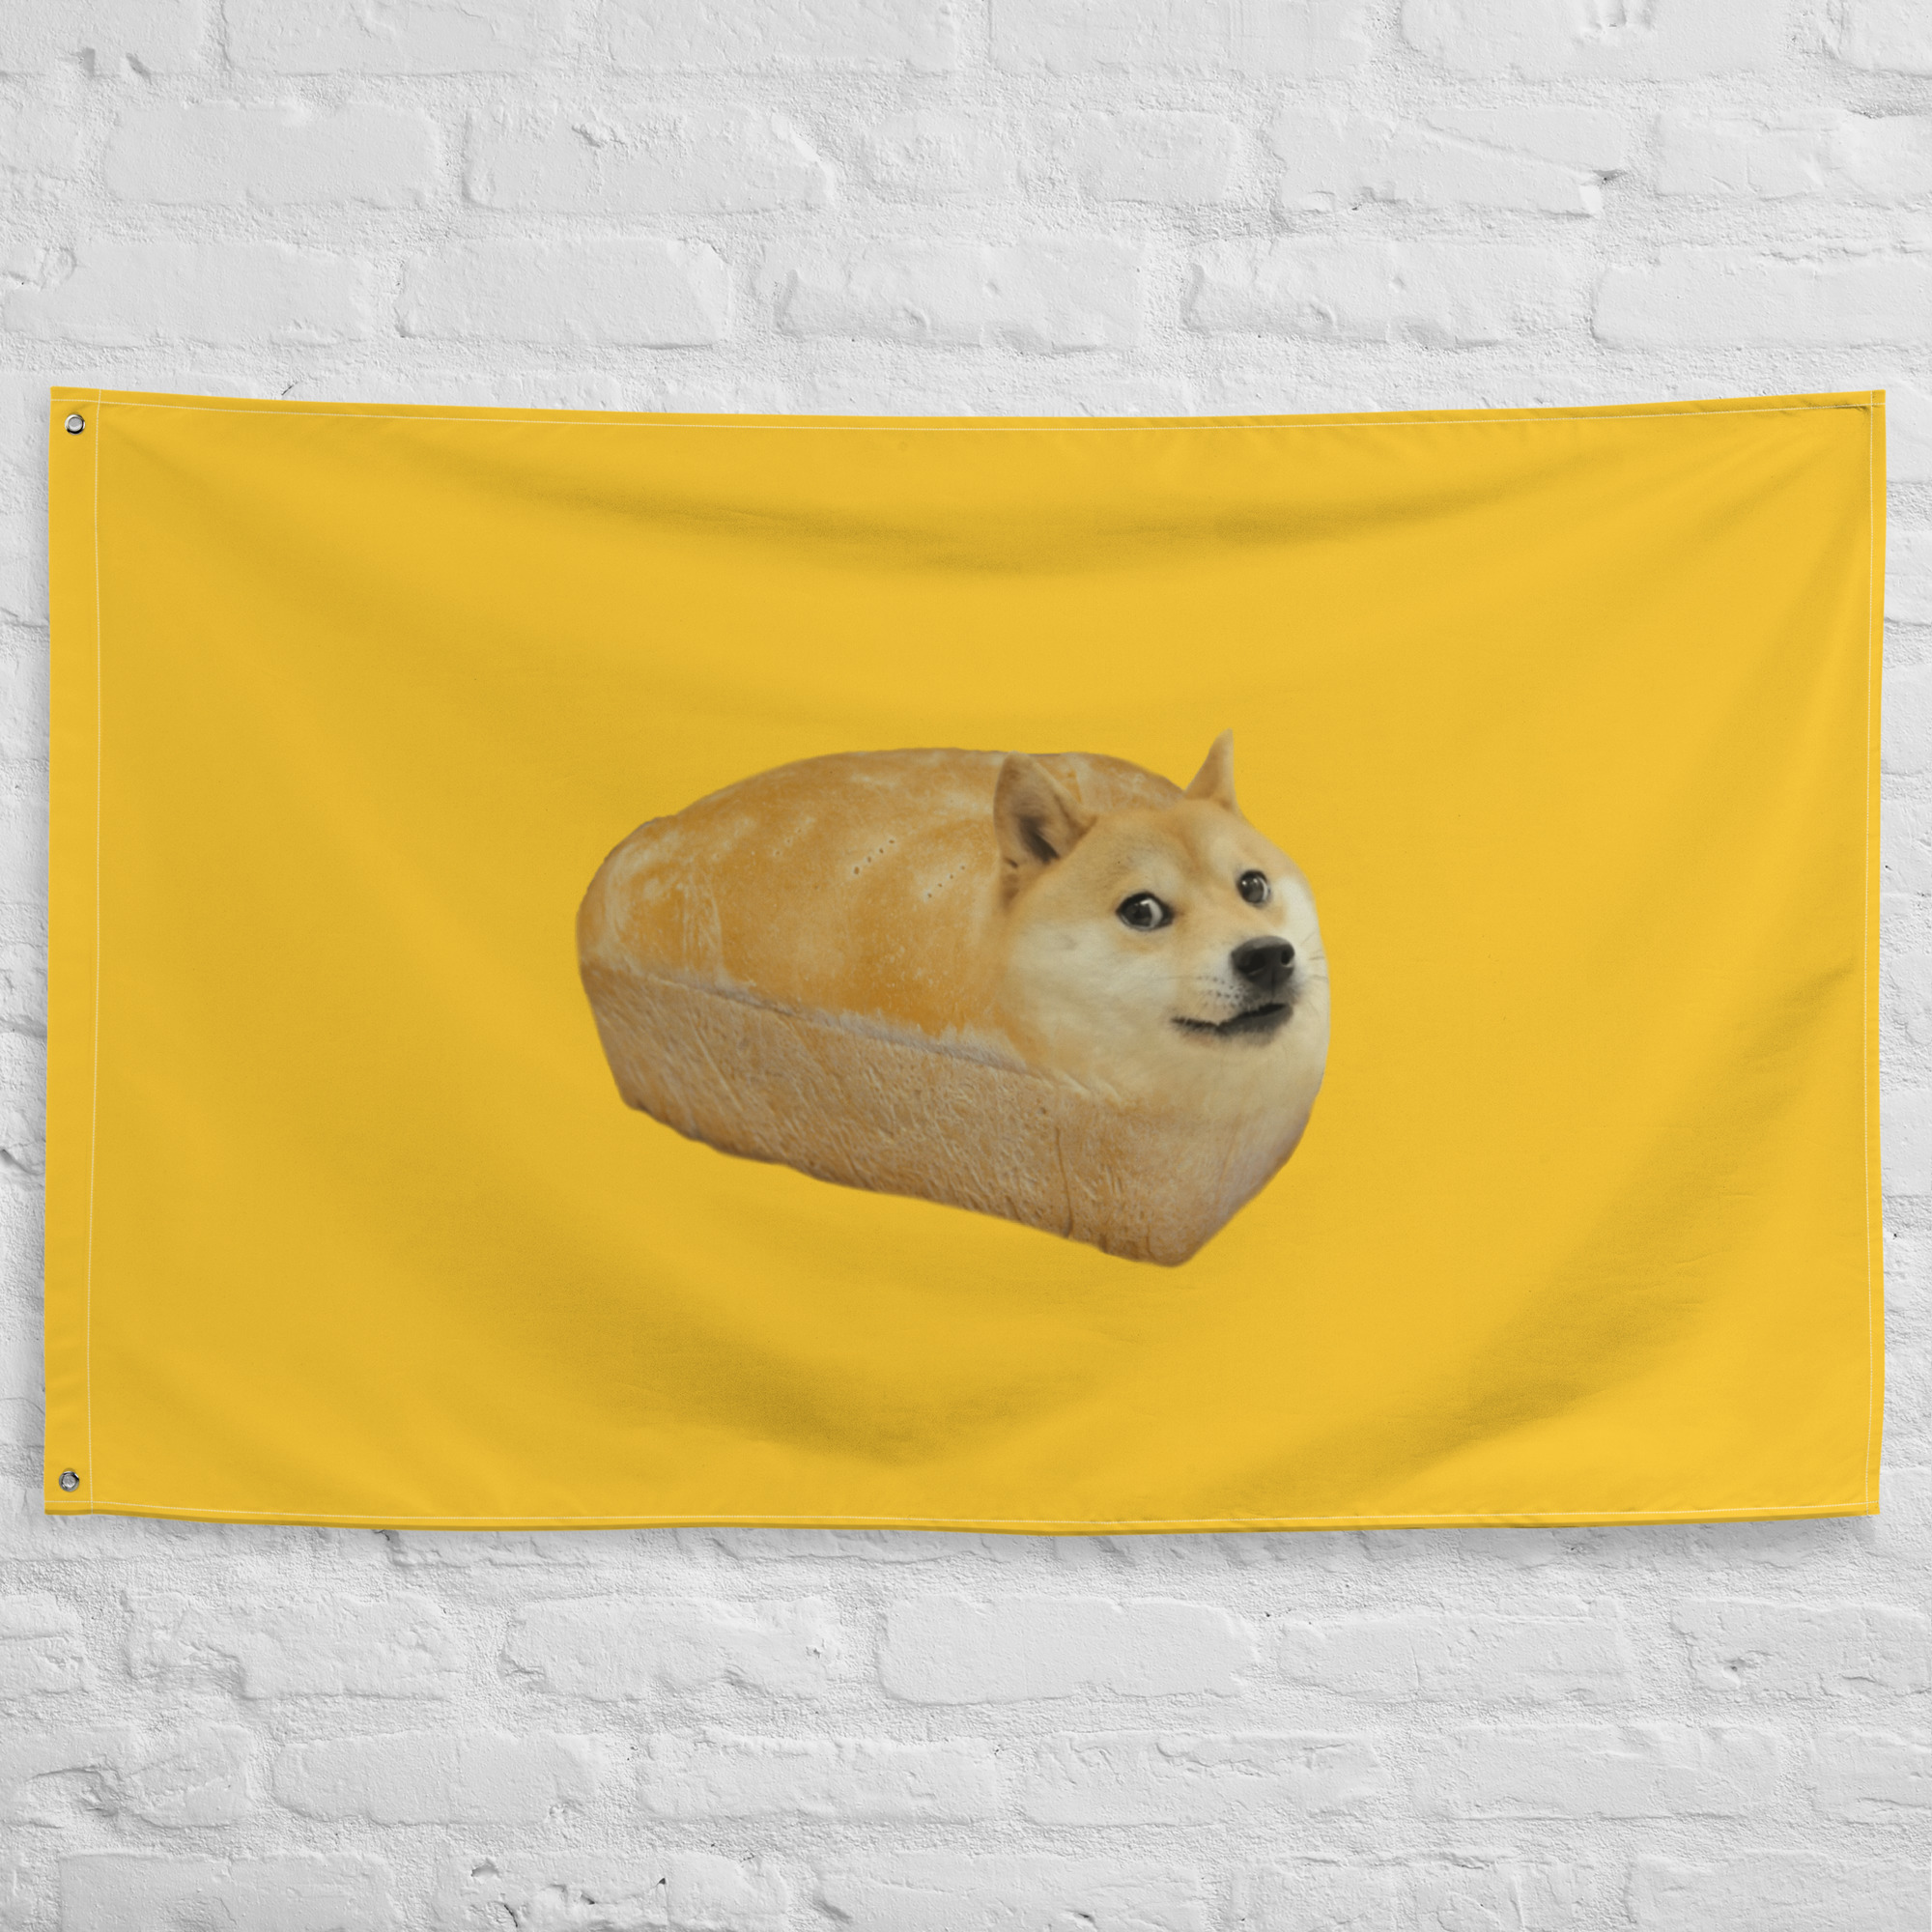 Doge Bread Meme featured on a dogecoin yellow flag